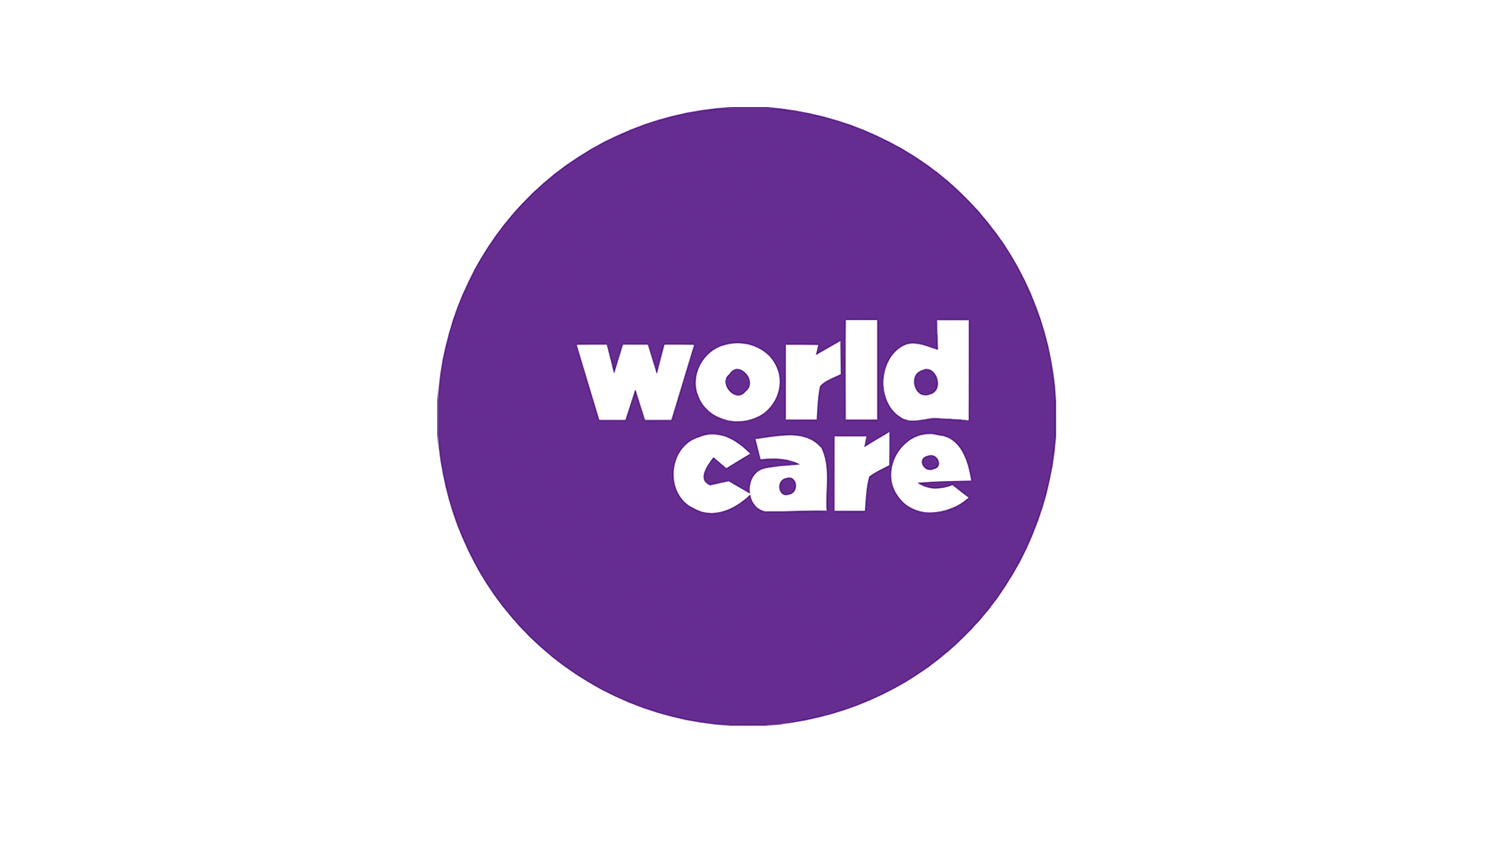 worldcare travel insurance policy wording